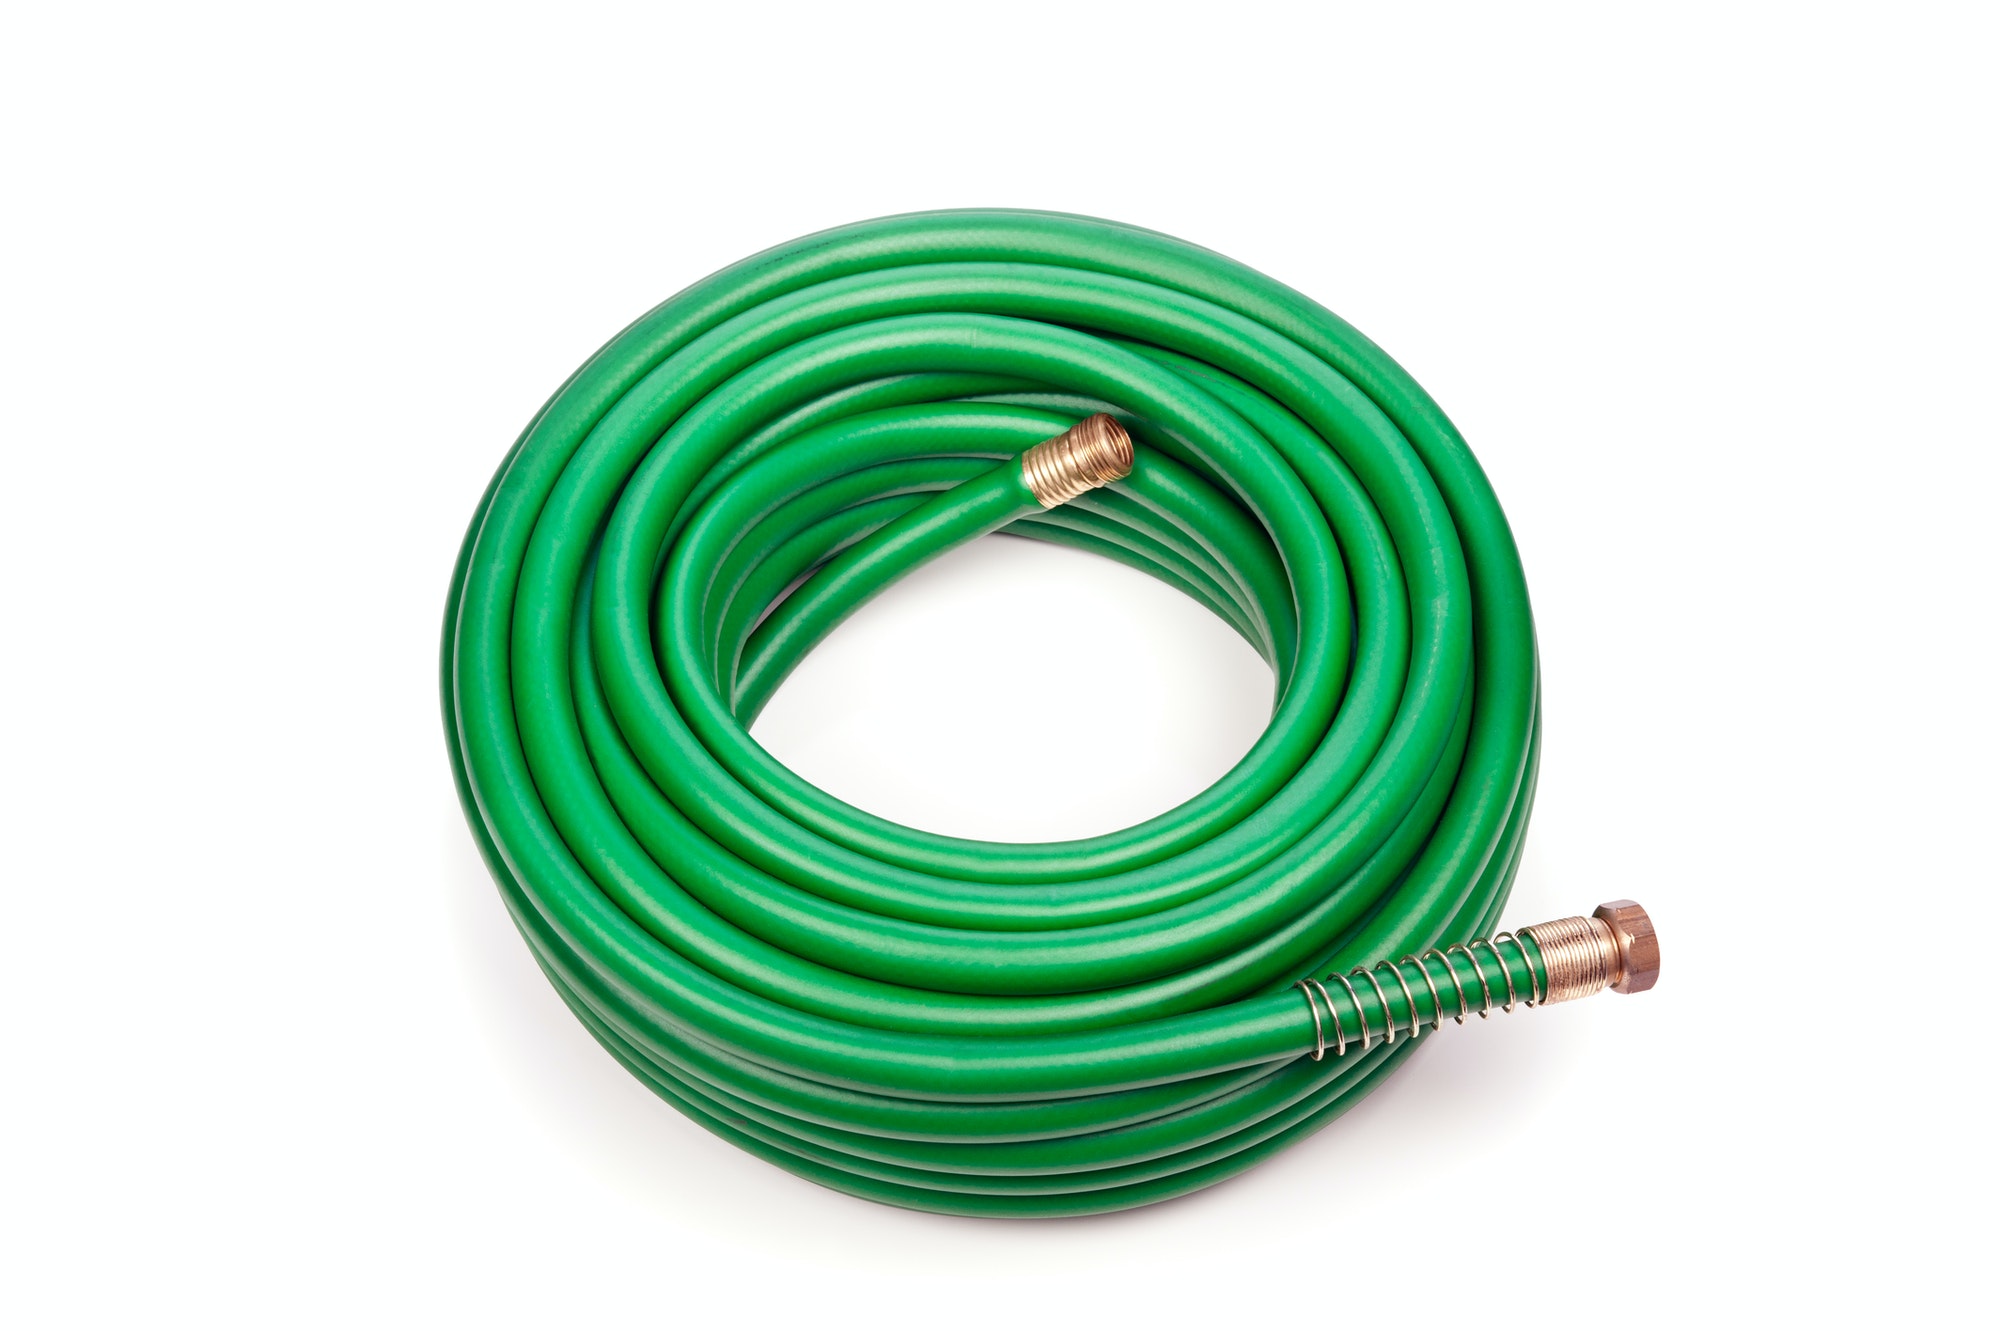 Garden hose for waterbed draining and filling.